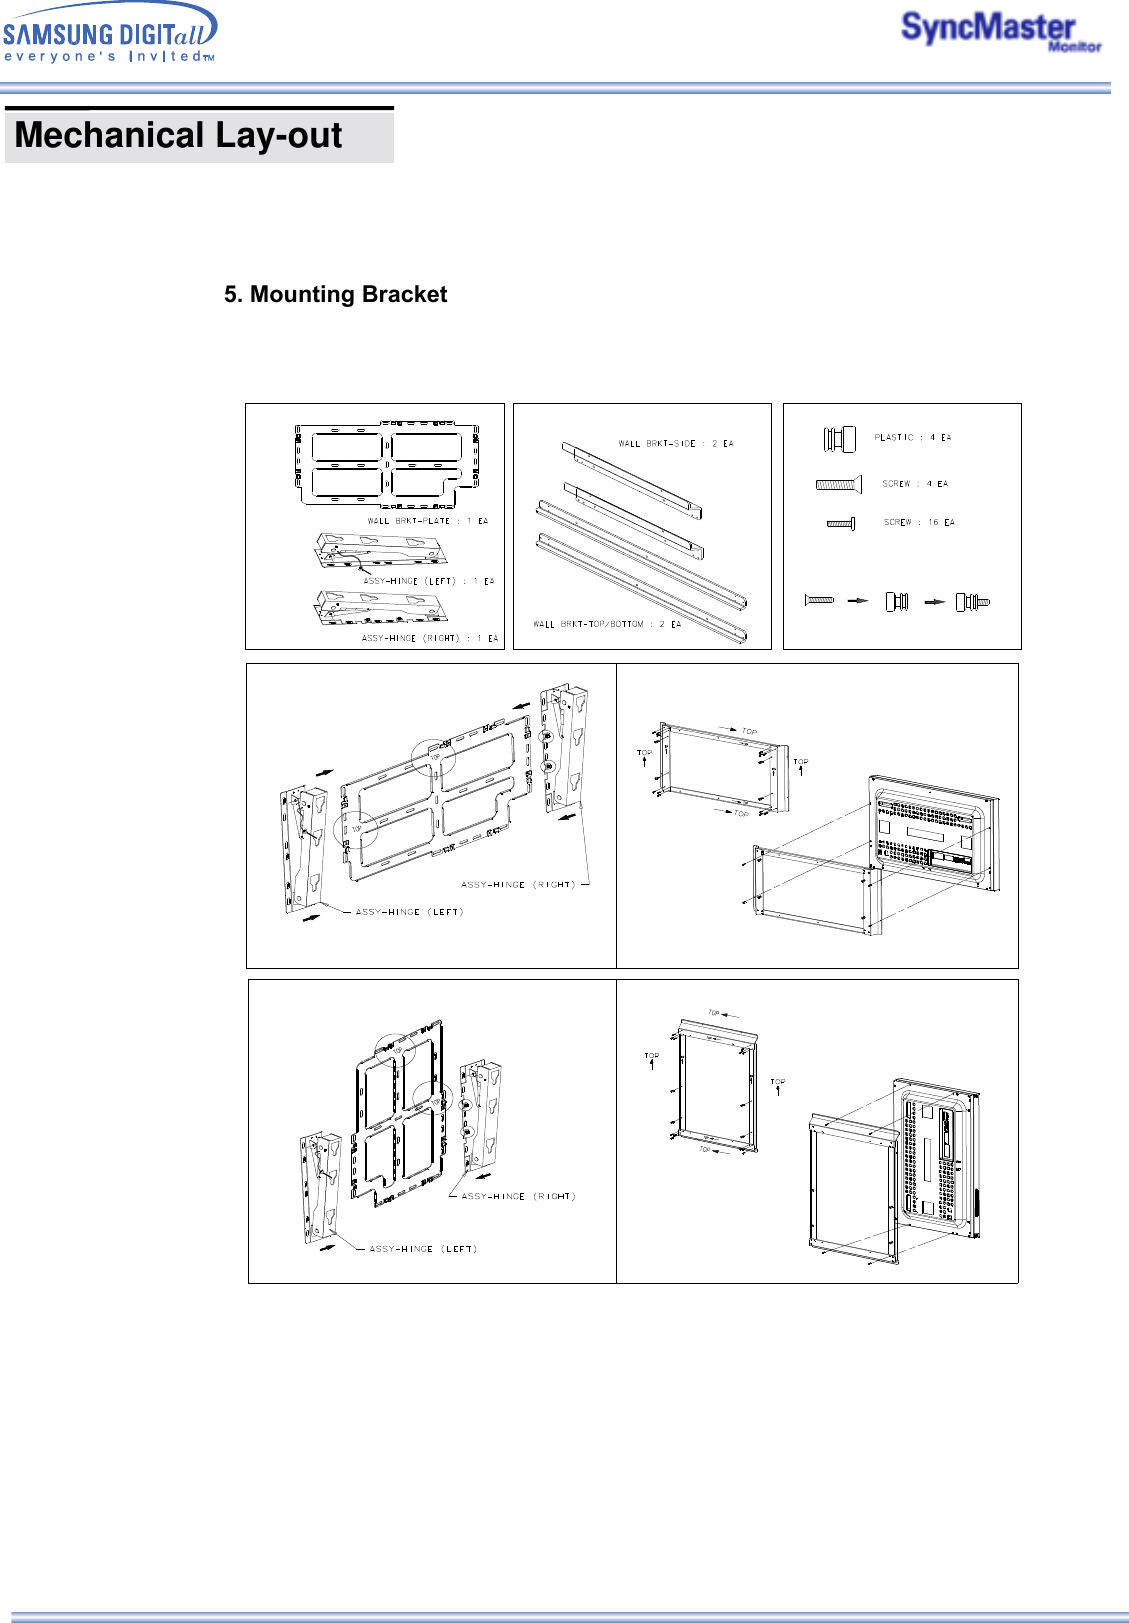 5. Mounting Bracket Mechanical Lay-out